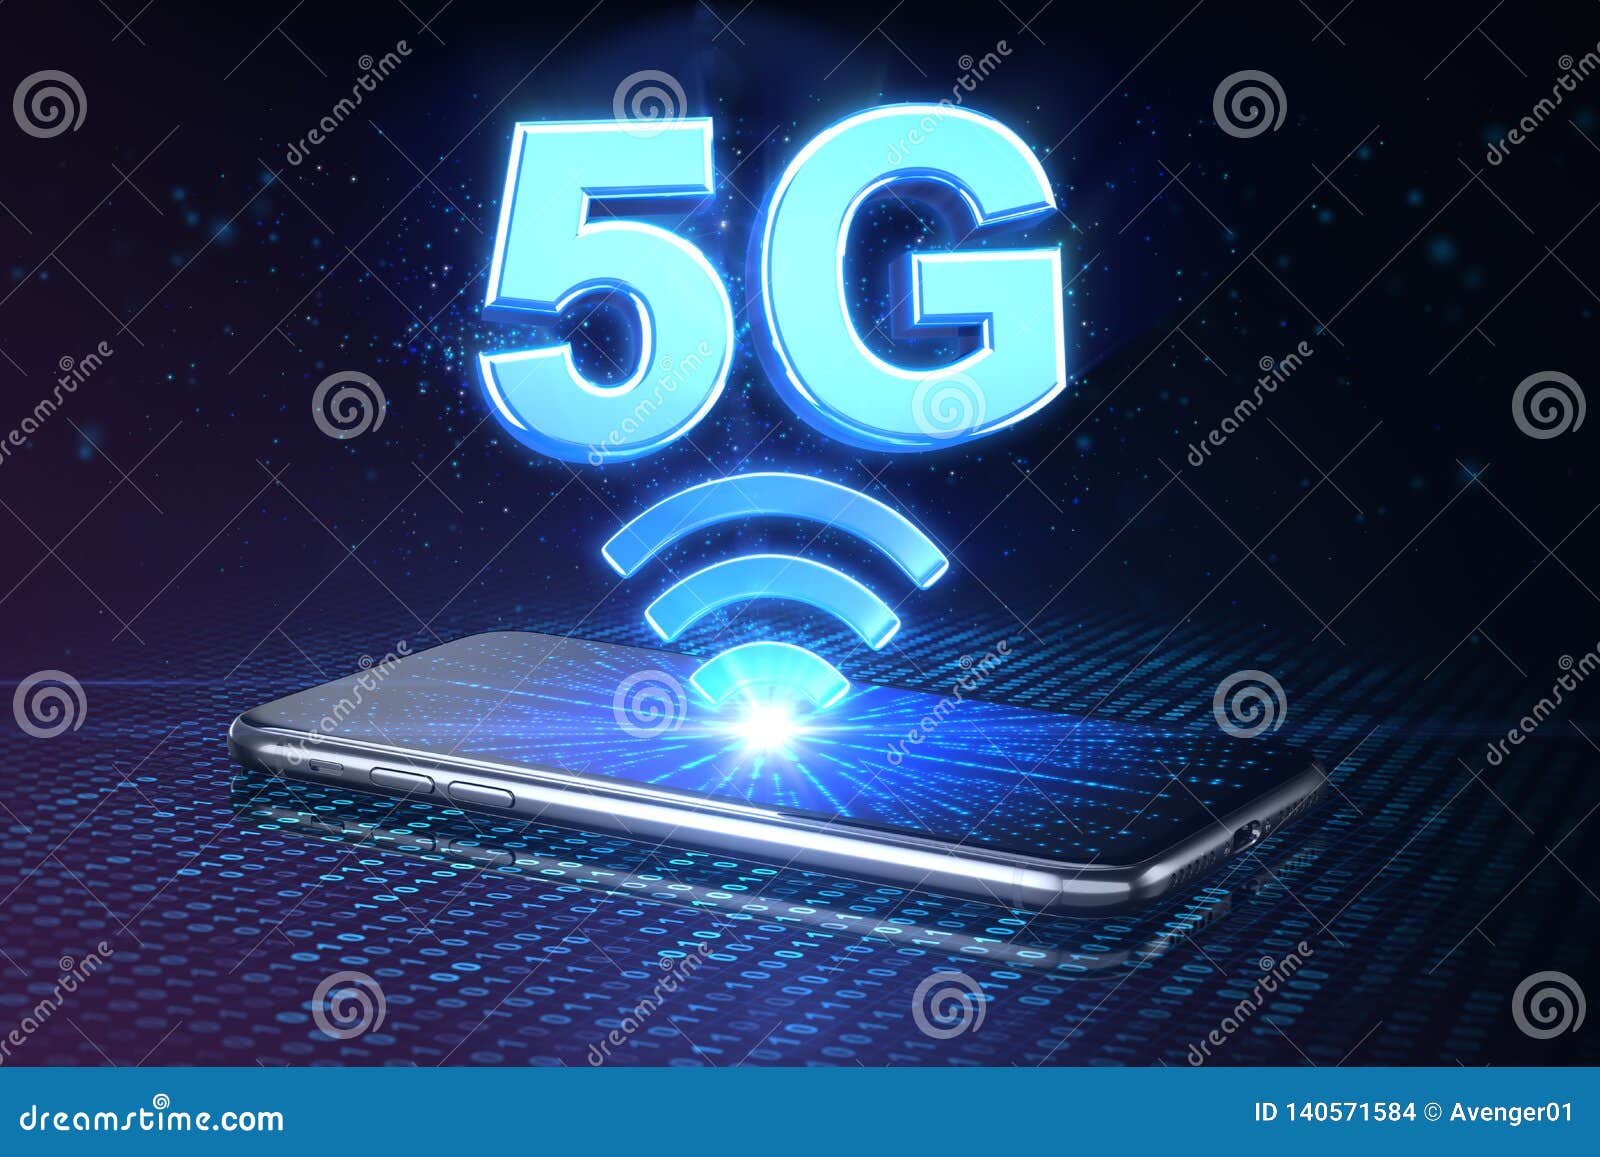 5g pulsing out of a smartphone.